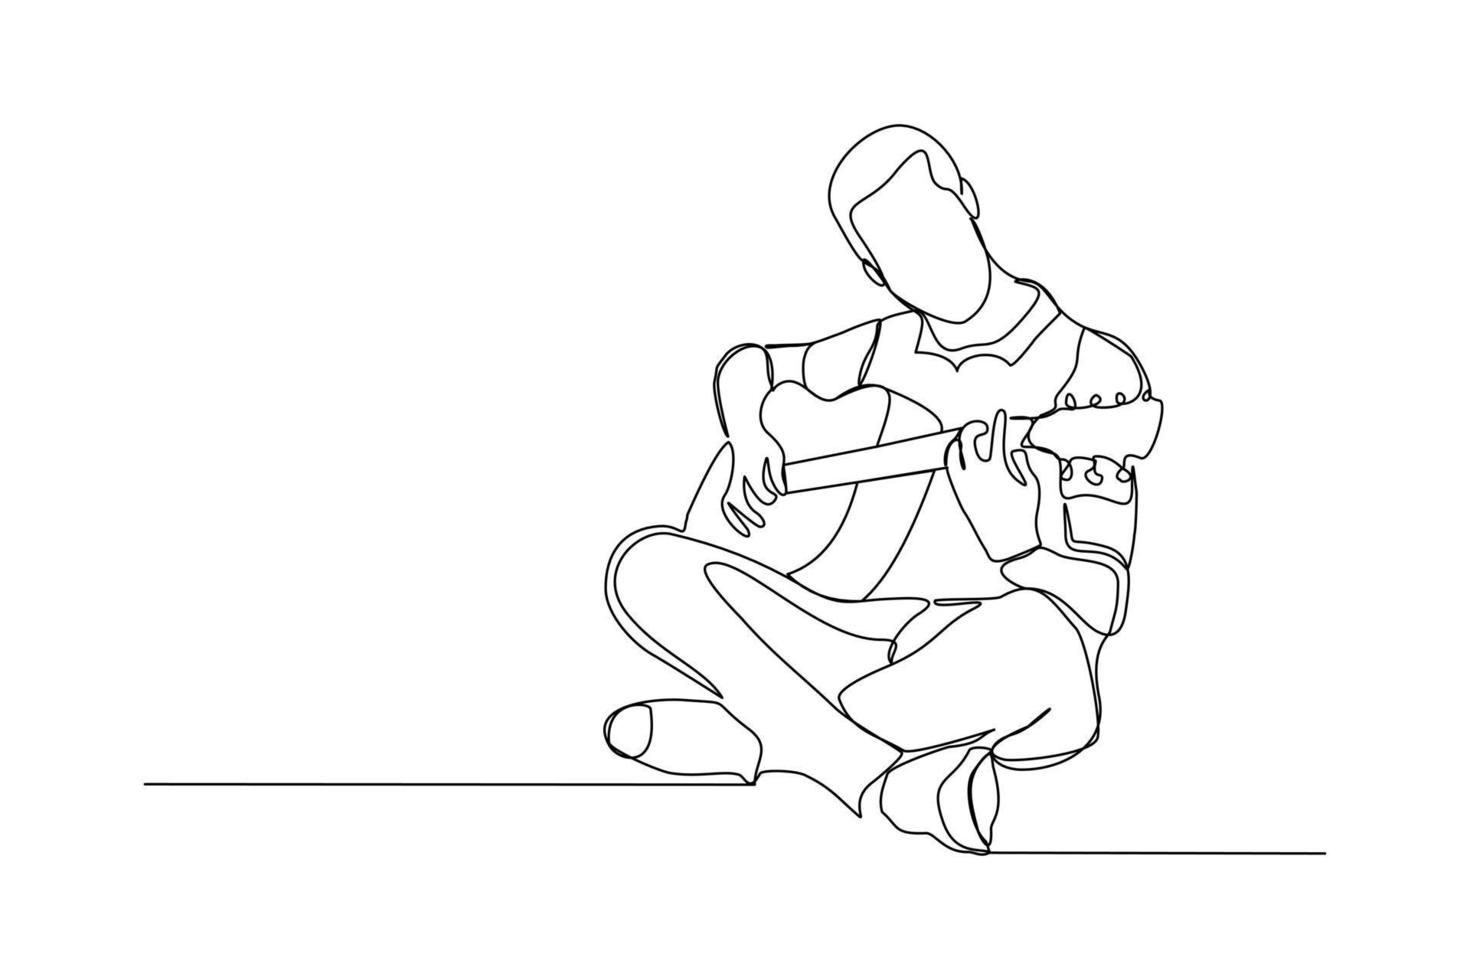 Continuous line drawing of a man playing guitar. Single one line art of musician guitarist vector illustration